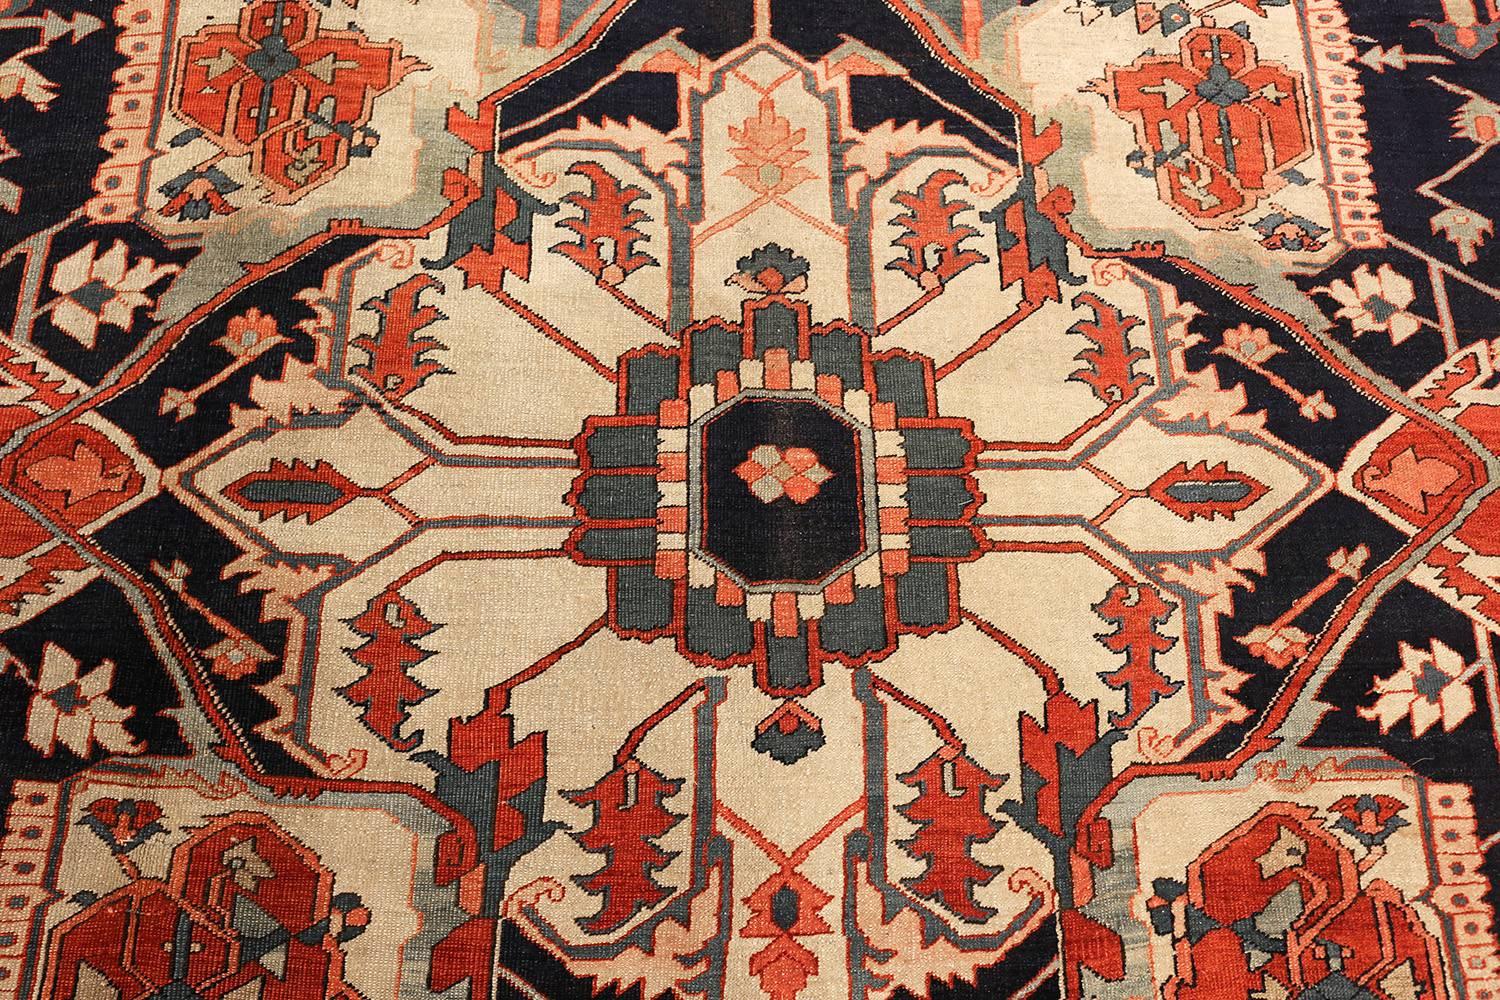 Hand-Knotted Antique Red Serapi Persian Rug. Size: 9 ft 8 in x 14 ft For Sale